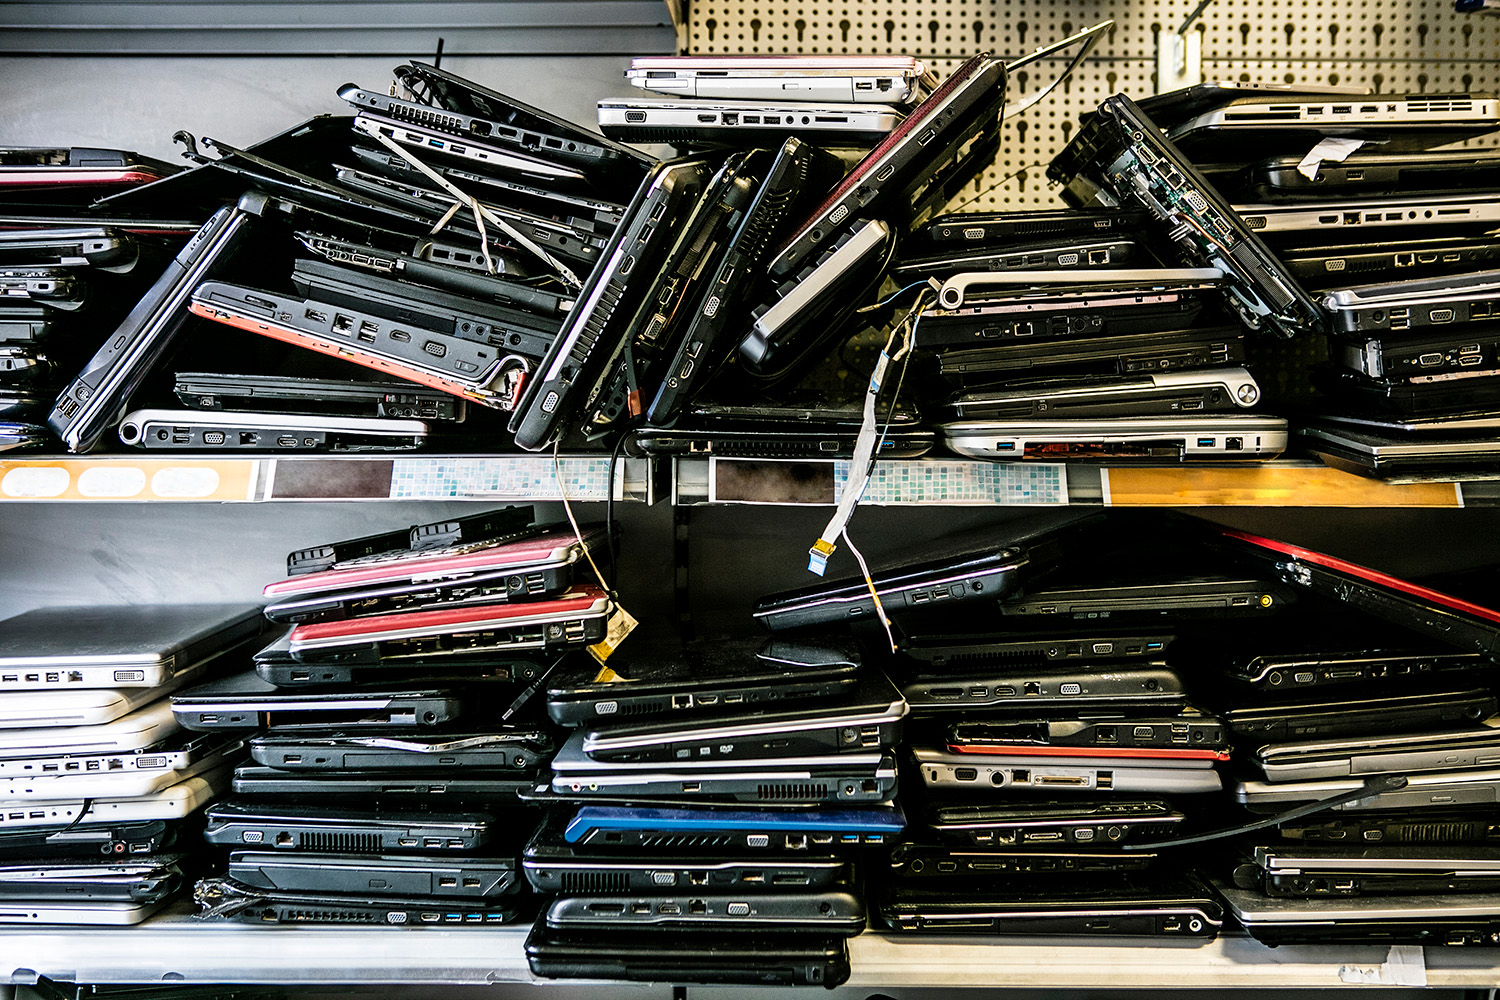 What to do with pile of old laptops on shelf